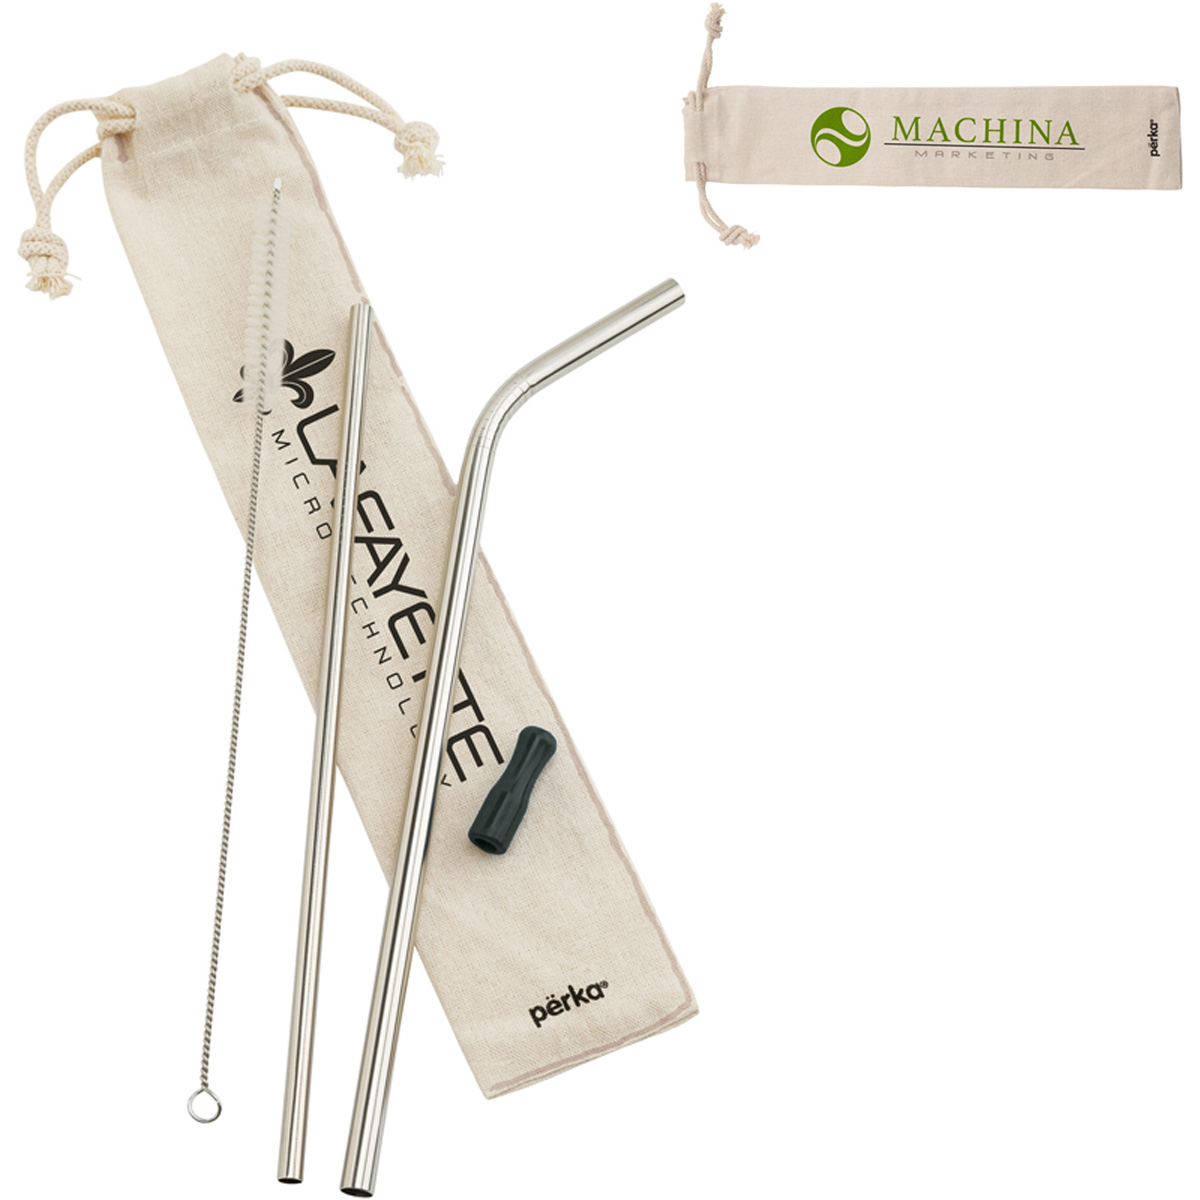 Perka® Stainless Steel Straw Set In Cotton Pouch | Reusable